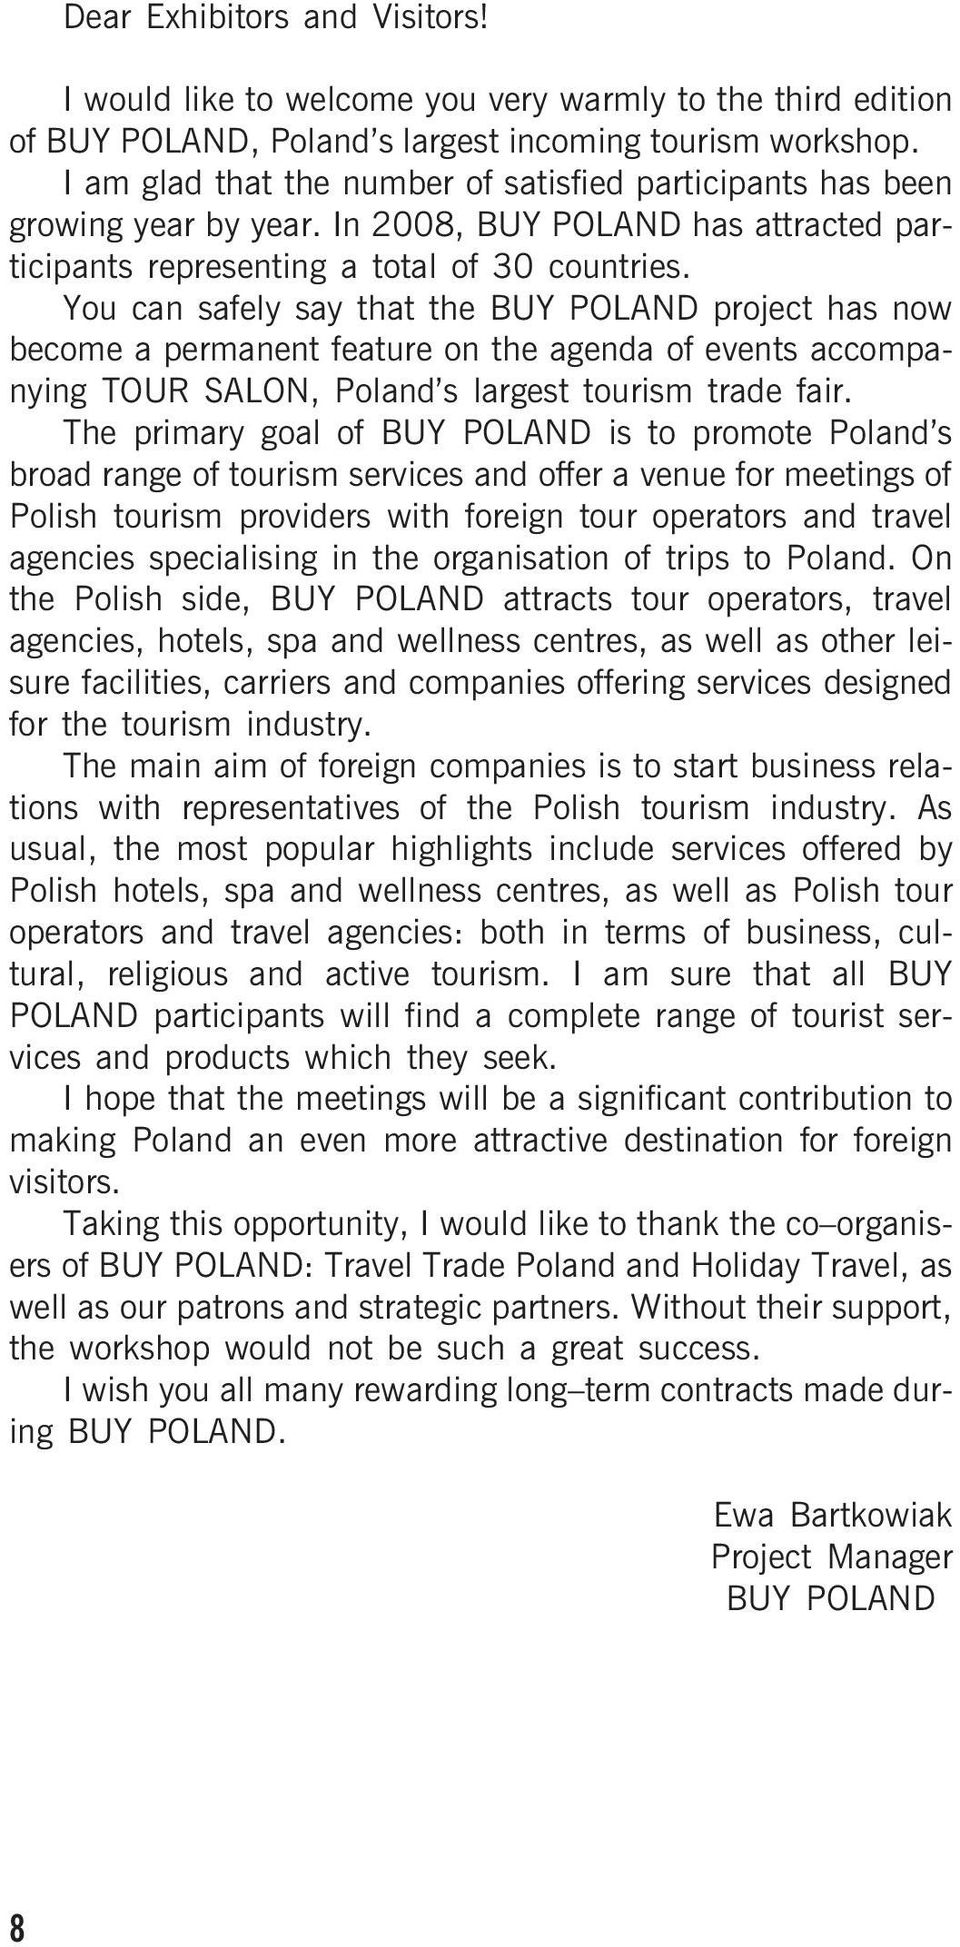 You can safely say that the BUY POLAND project has now become a permanent feature on the agenda of events accompanying TOUR SALON, Poland s largest tourism trade fair.